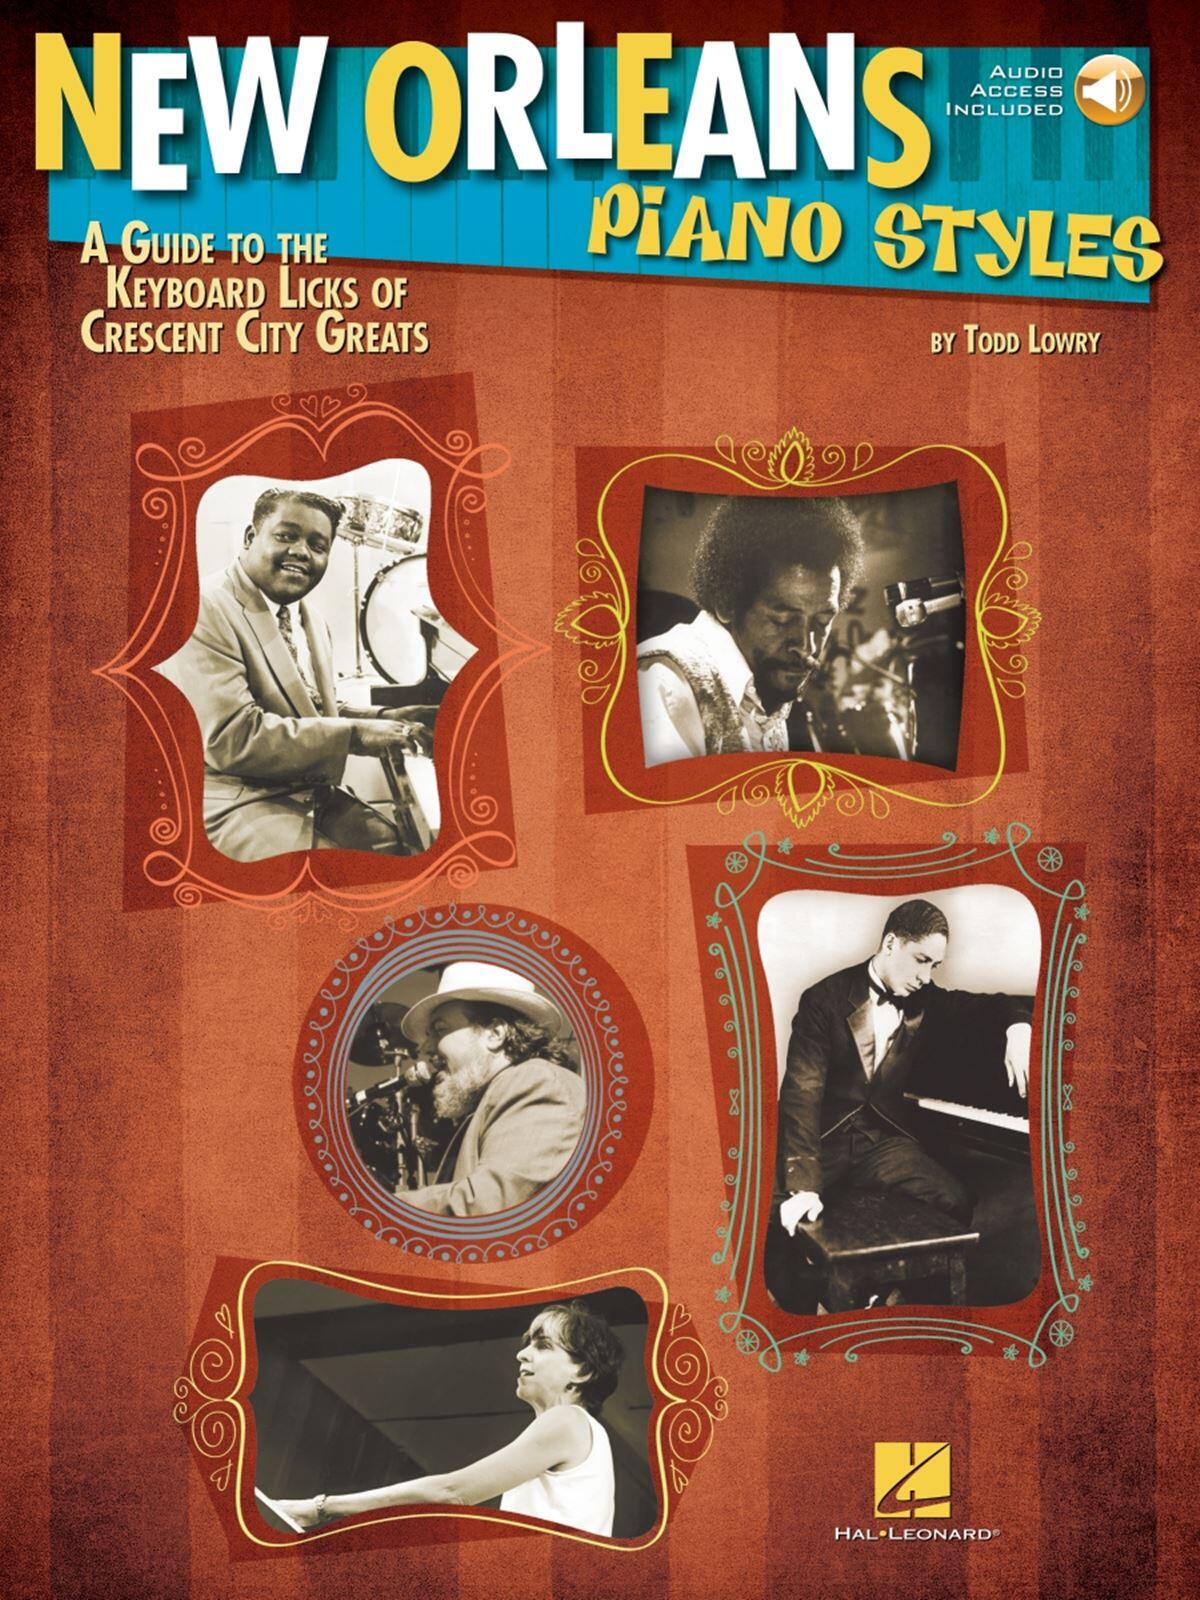 New Orleans Piano Styles A Guide to the Keyboard Licks of Crescent City Greats : photo 1